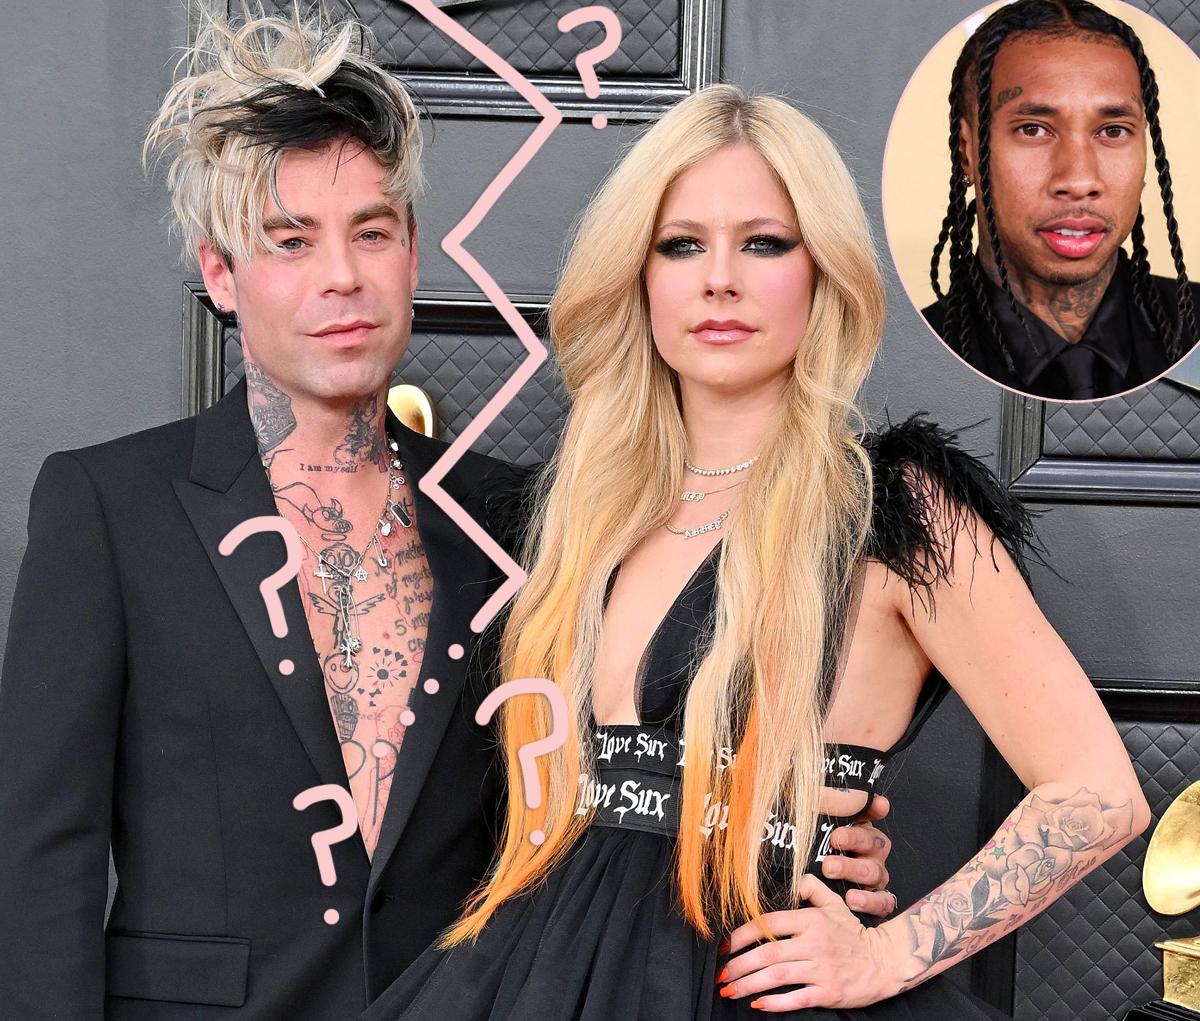 Avril Lavigne Breaks Off Engagement With Mod Sun But His Rep Says Split Is News To Him 